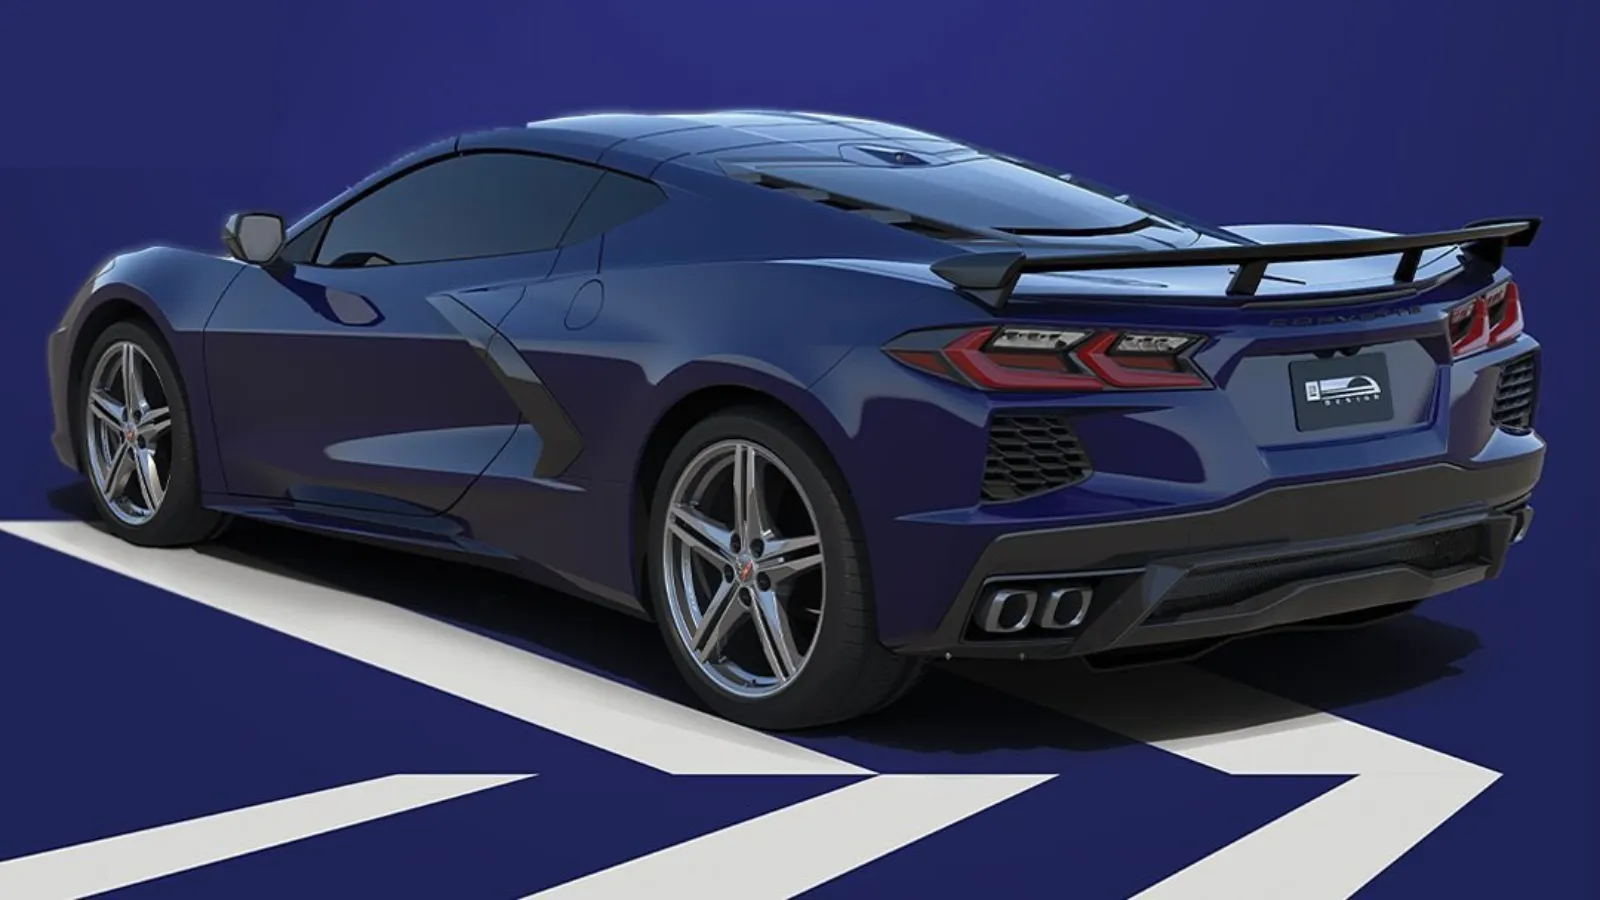 Three New Paint Colors are Introduced to The 2025 Corvette